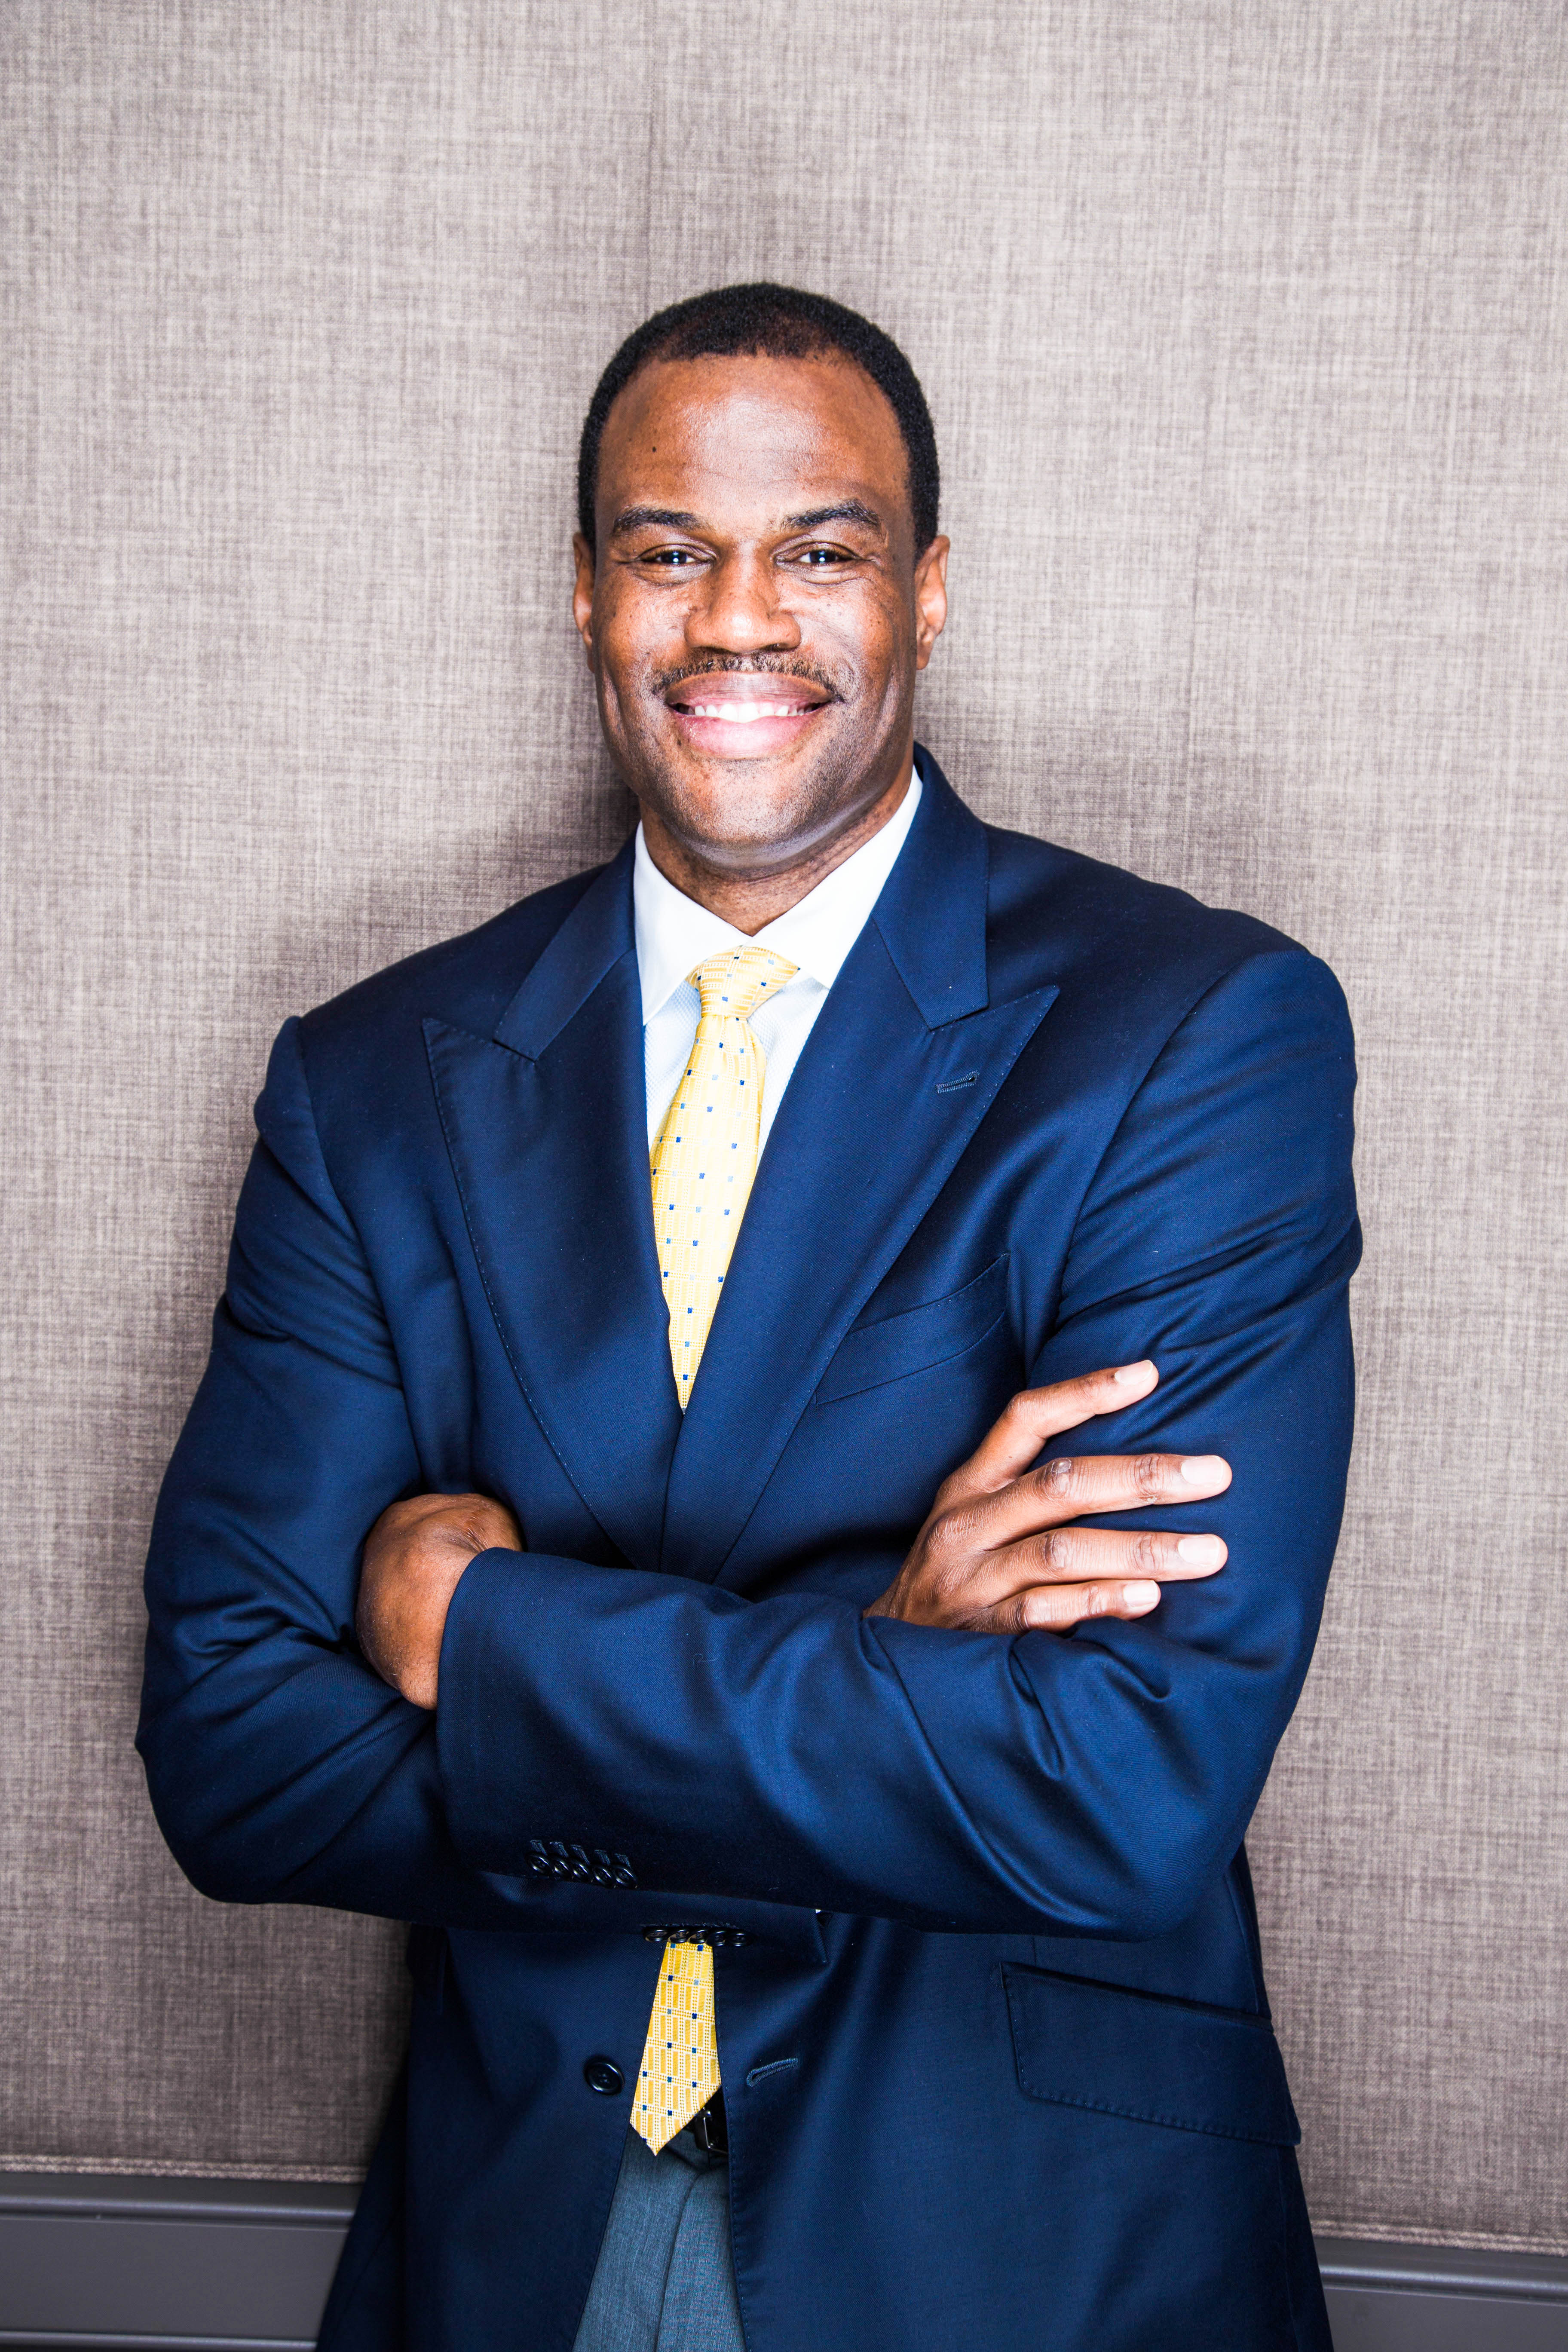 David Robinson Teams Up With U.S. Chamber's Hiring Our Heroes Program